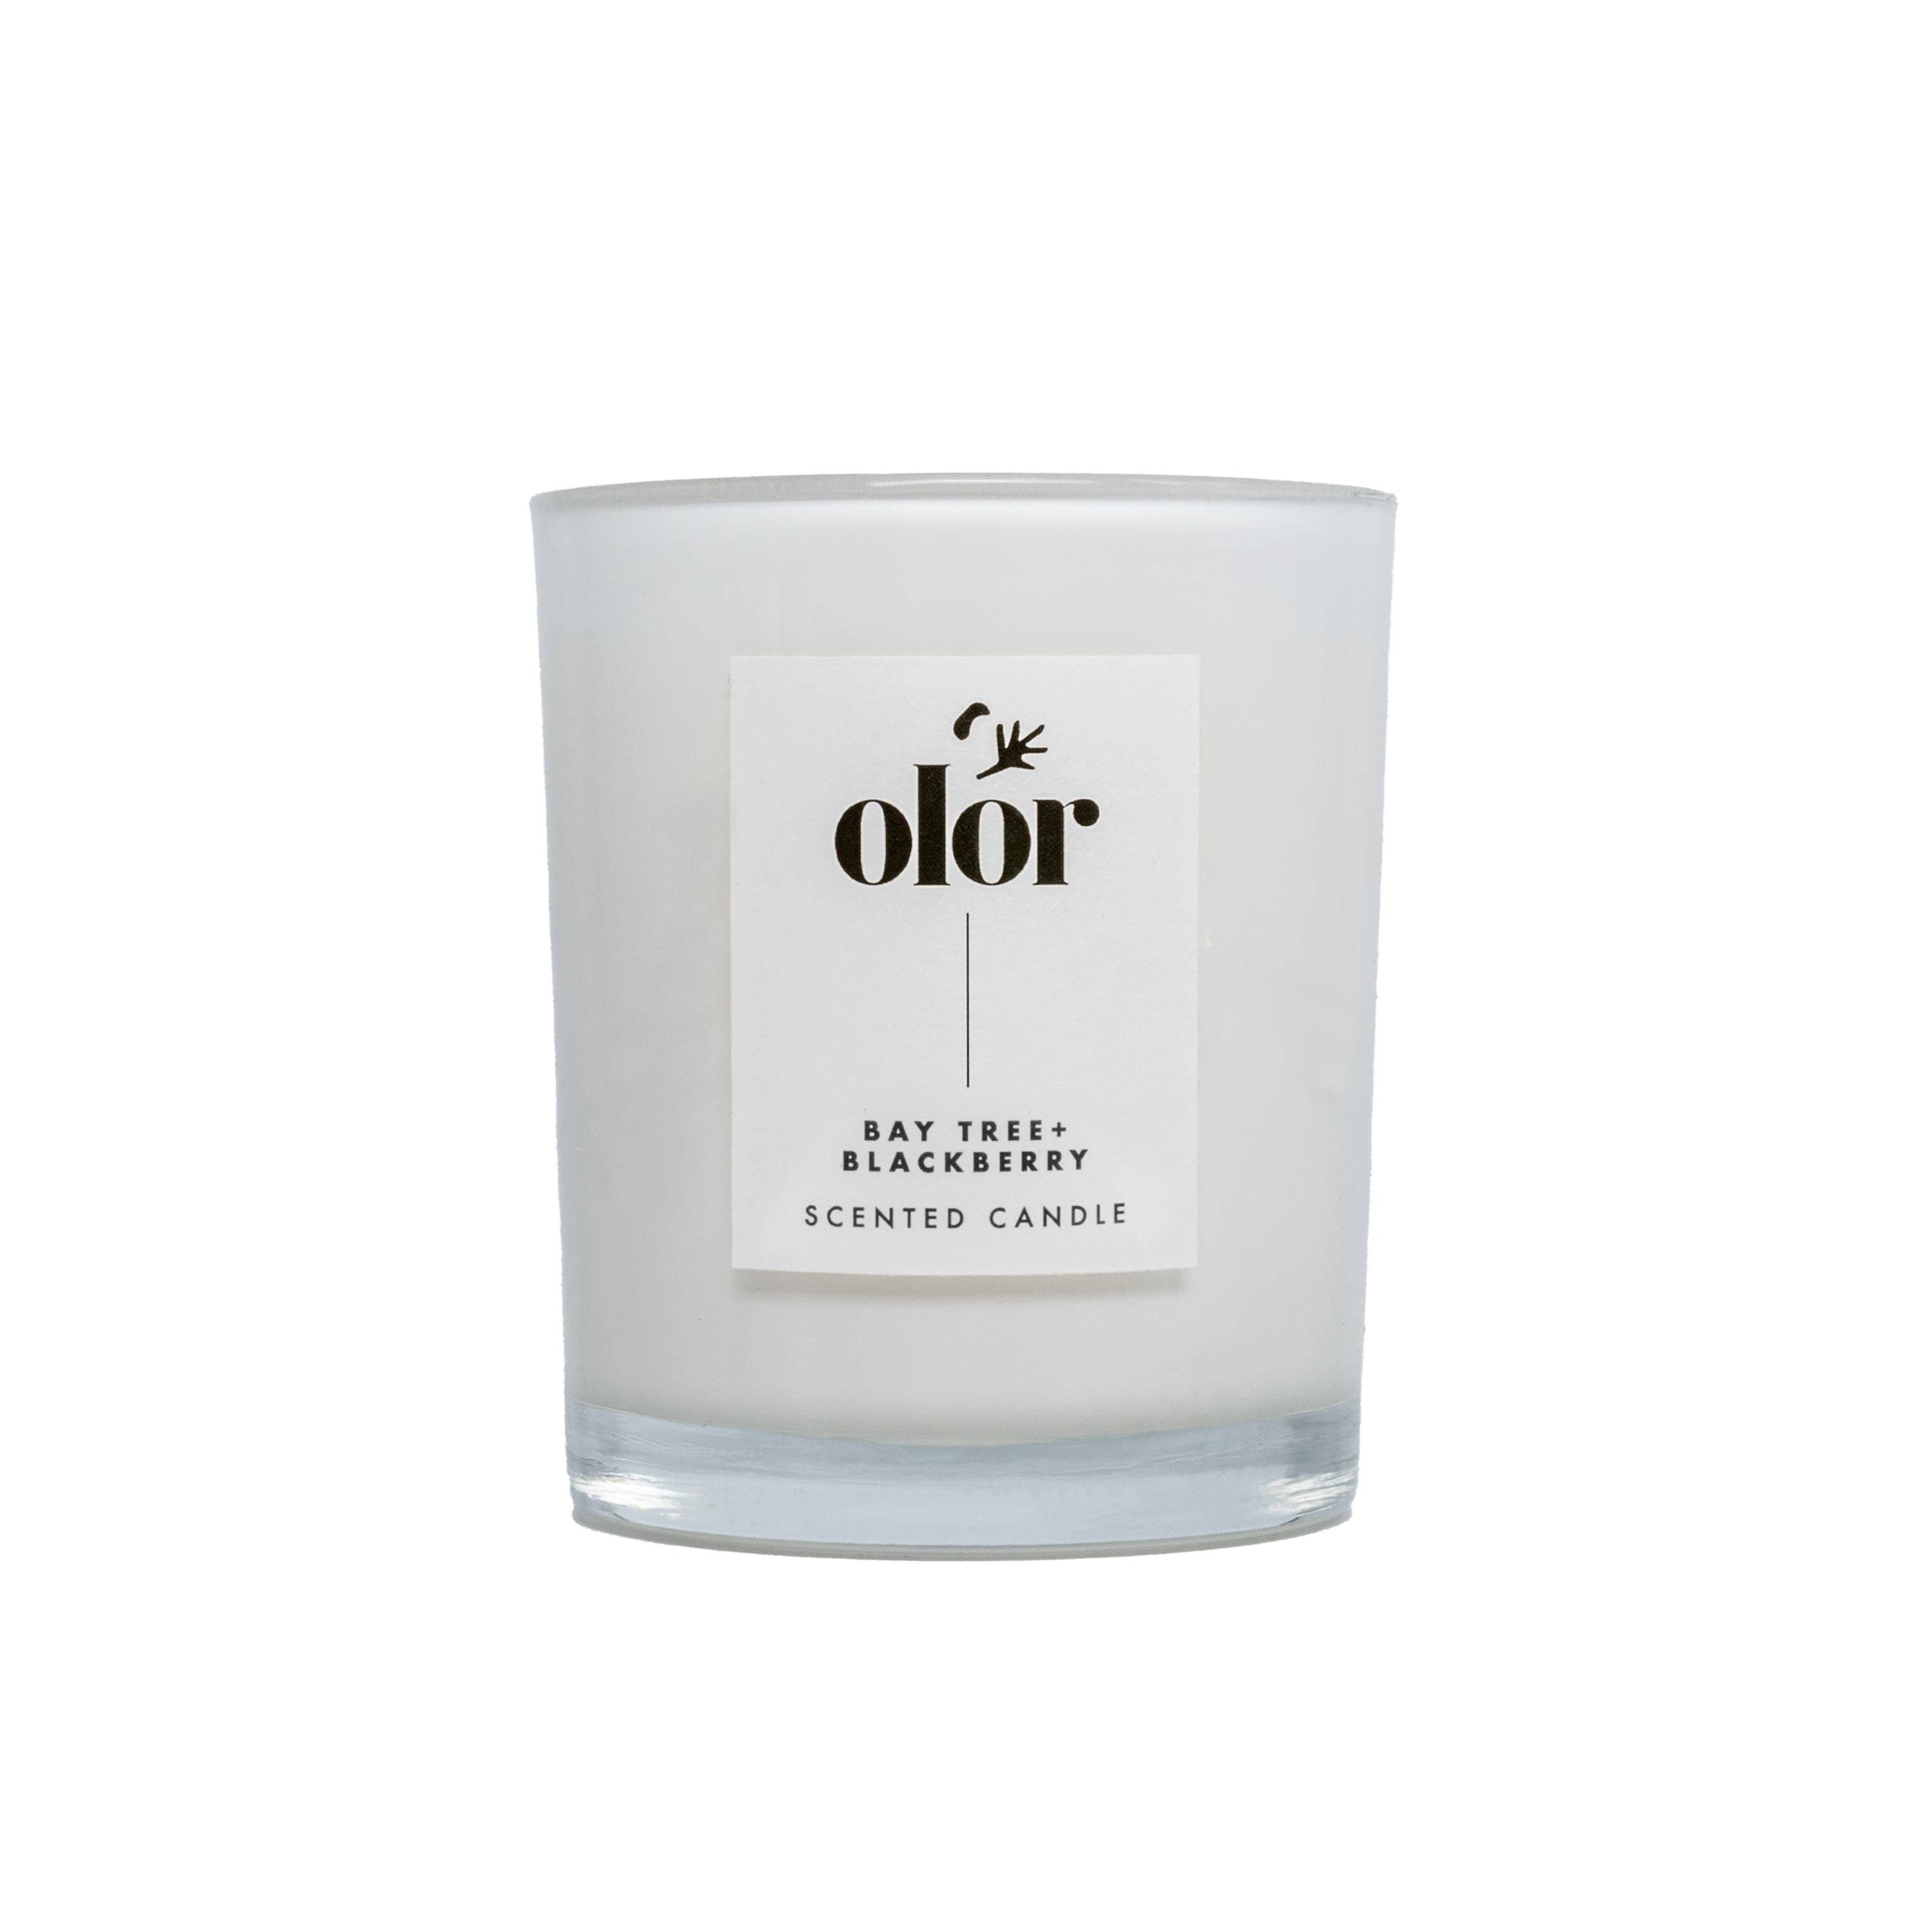 OLOR Bay Tree + Blackberry Luxury Scented Candle Home Fragrance